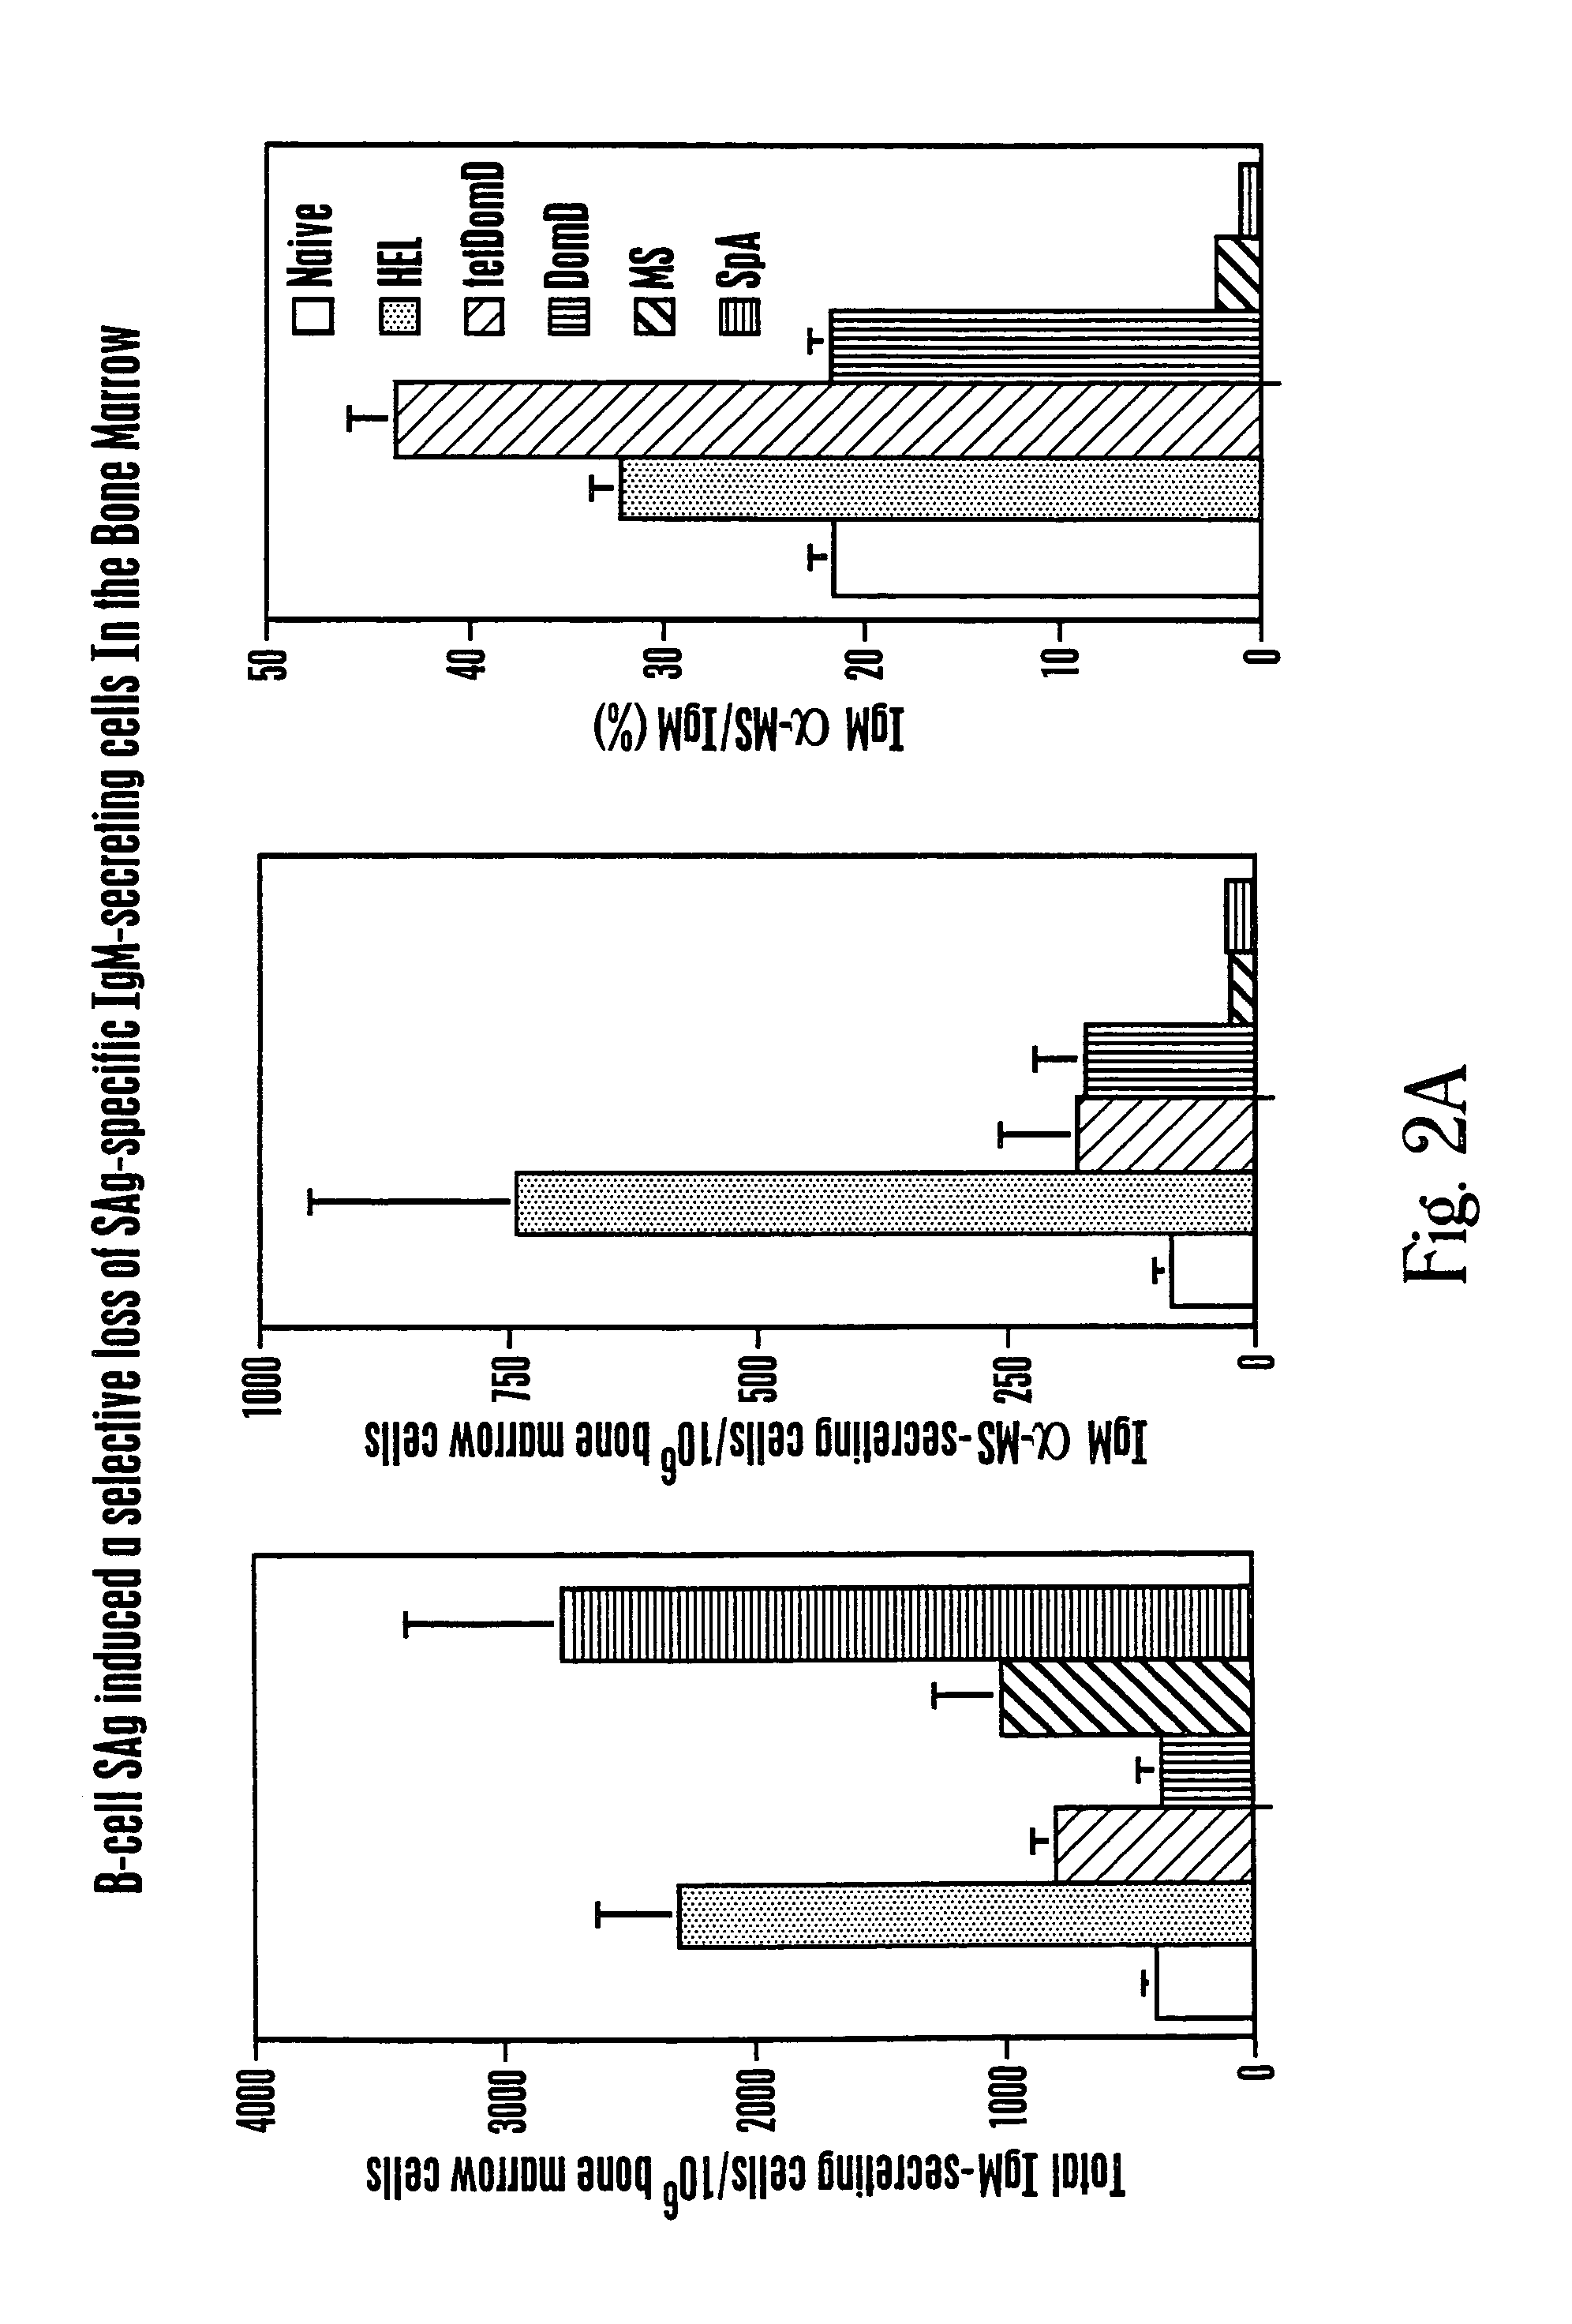 Protein A based binding domains with desirable activities